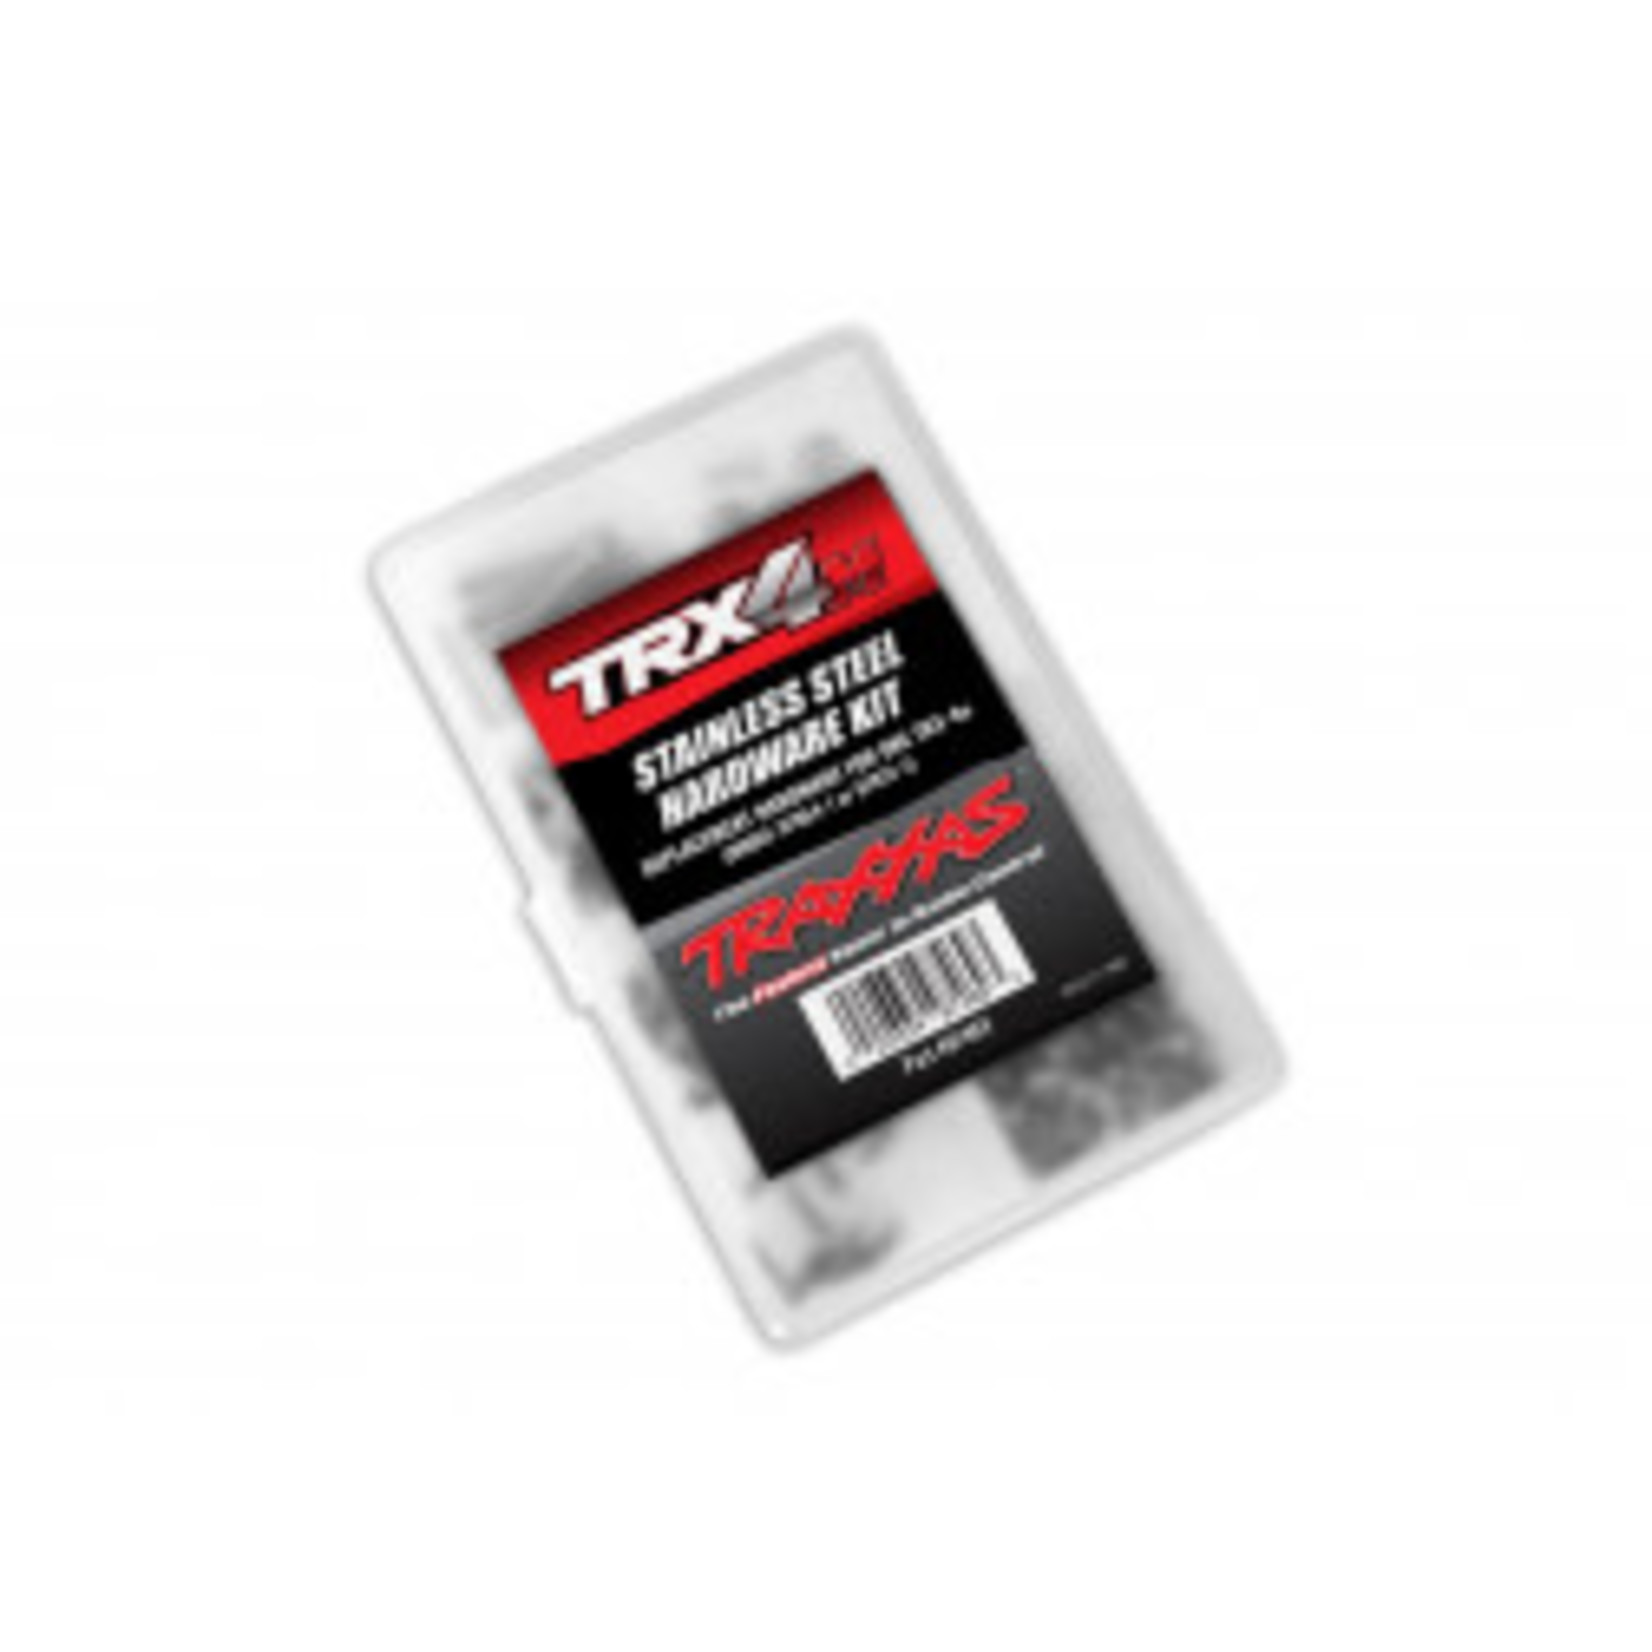 Traxxas TRX-4M Hardware kit, stainless steel, complete